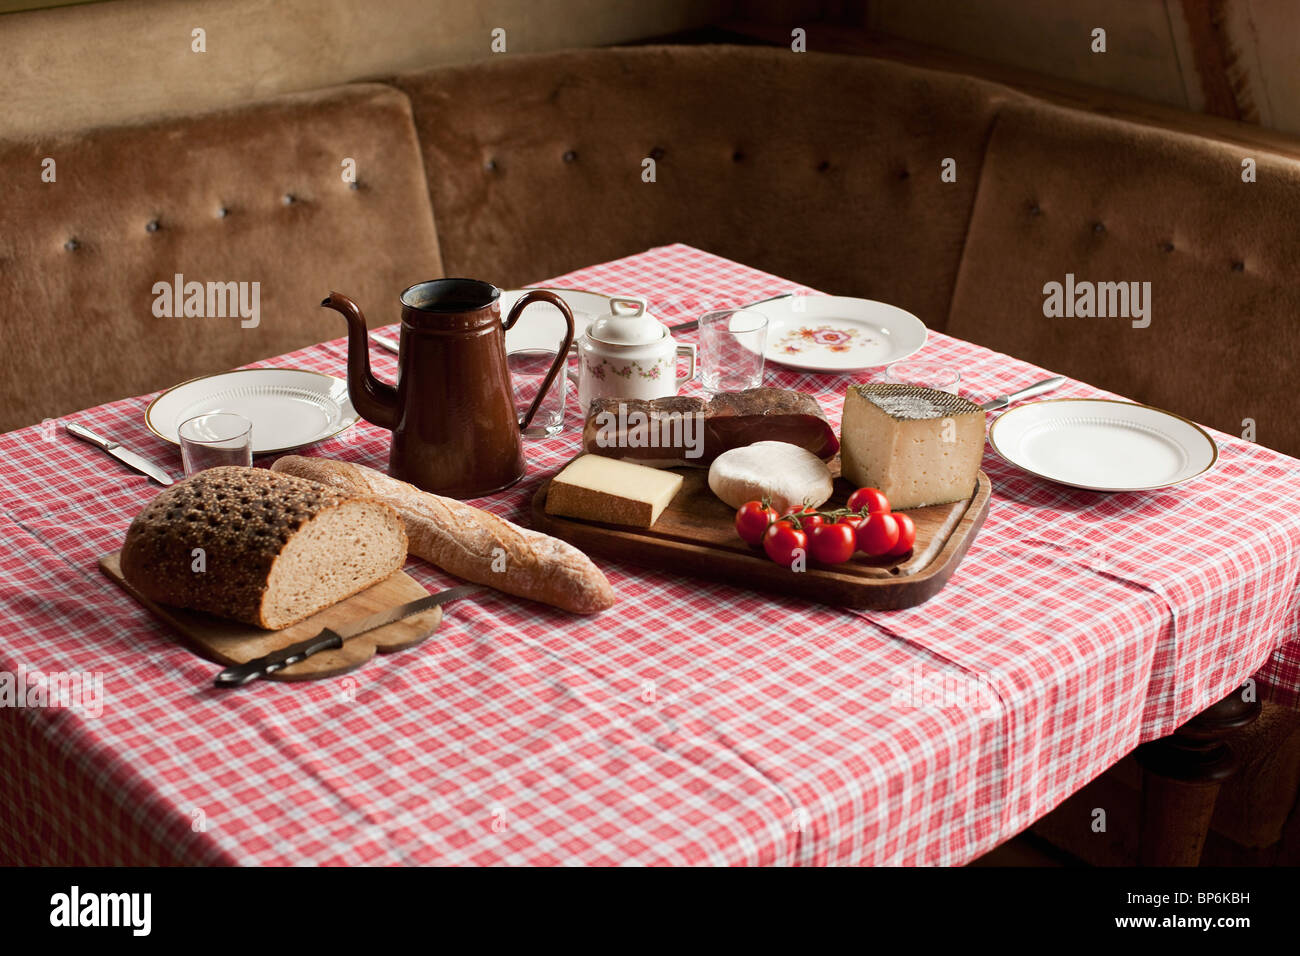 A simple rustic meal laid out on a set table Stock Photo